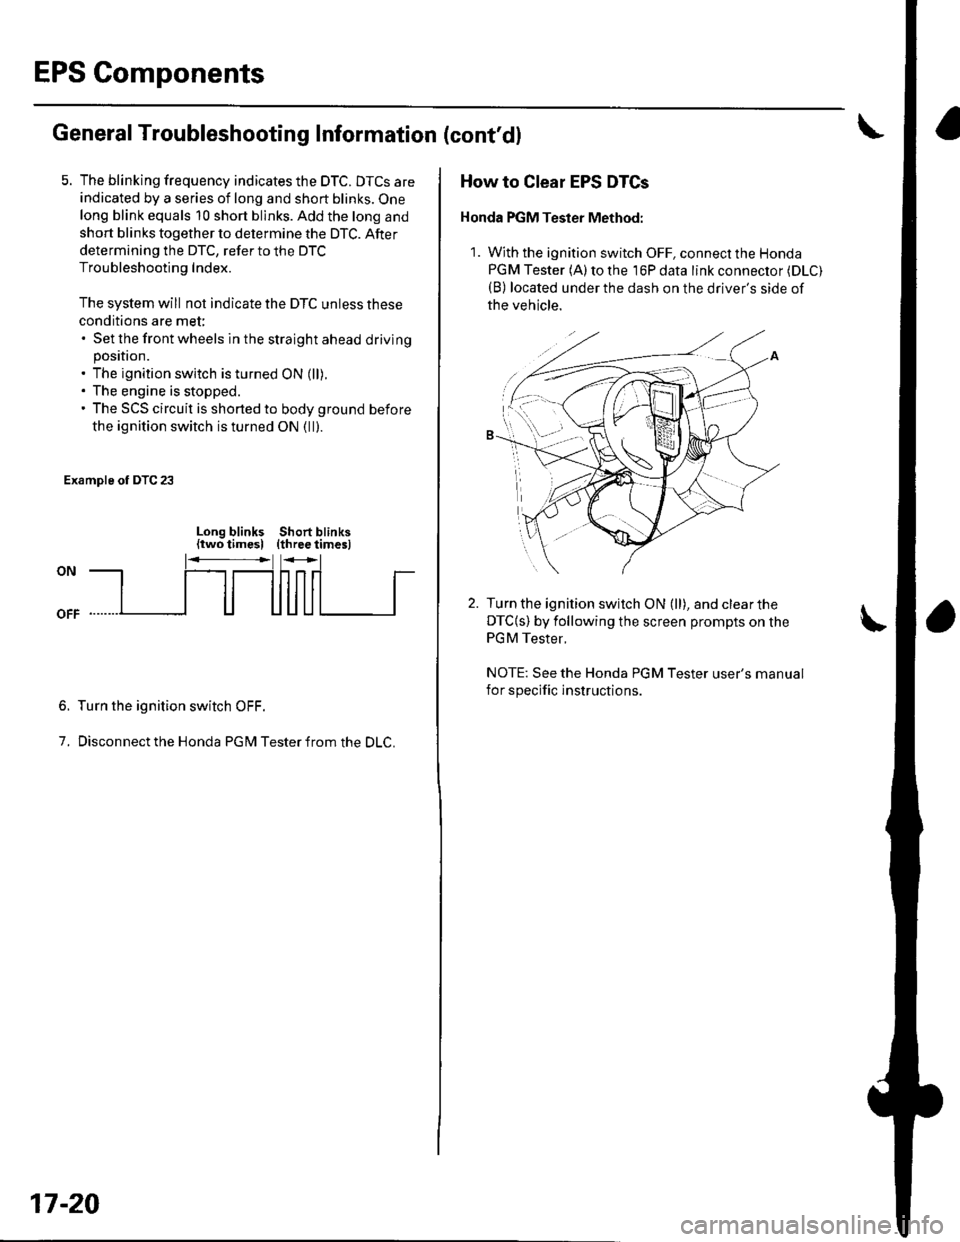 HONDA CIVIC 2003 7.G Workshop Manual EPS Components
General Troubleshooting Information (contdl
5. The blinking frequency indicates the DTC. DTCS are
indicated by a series of long and short blinks. One
long blink equals 10 short blinks.